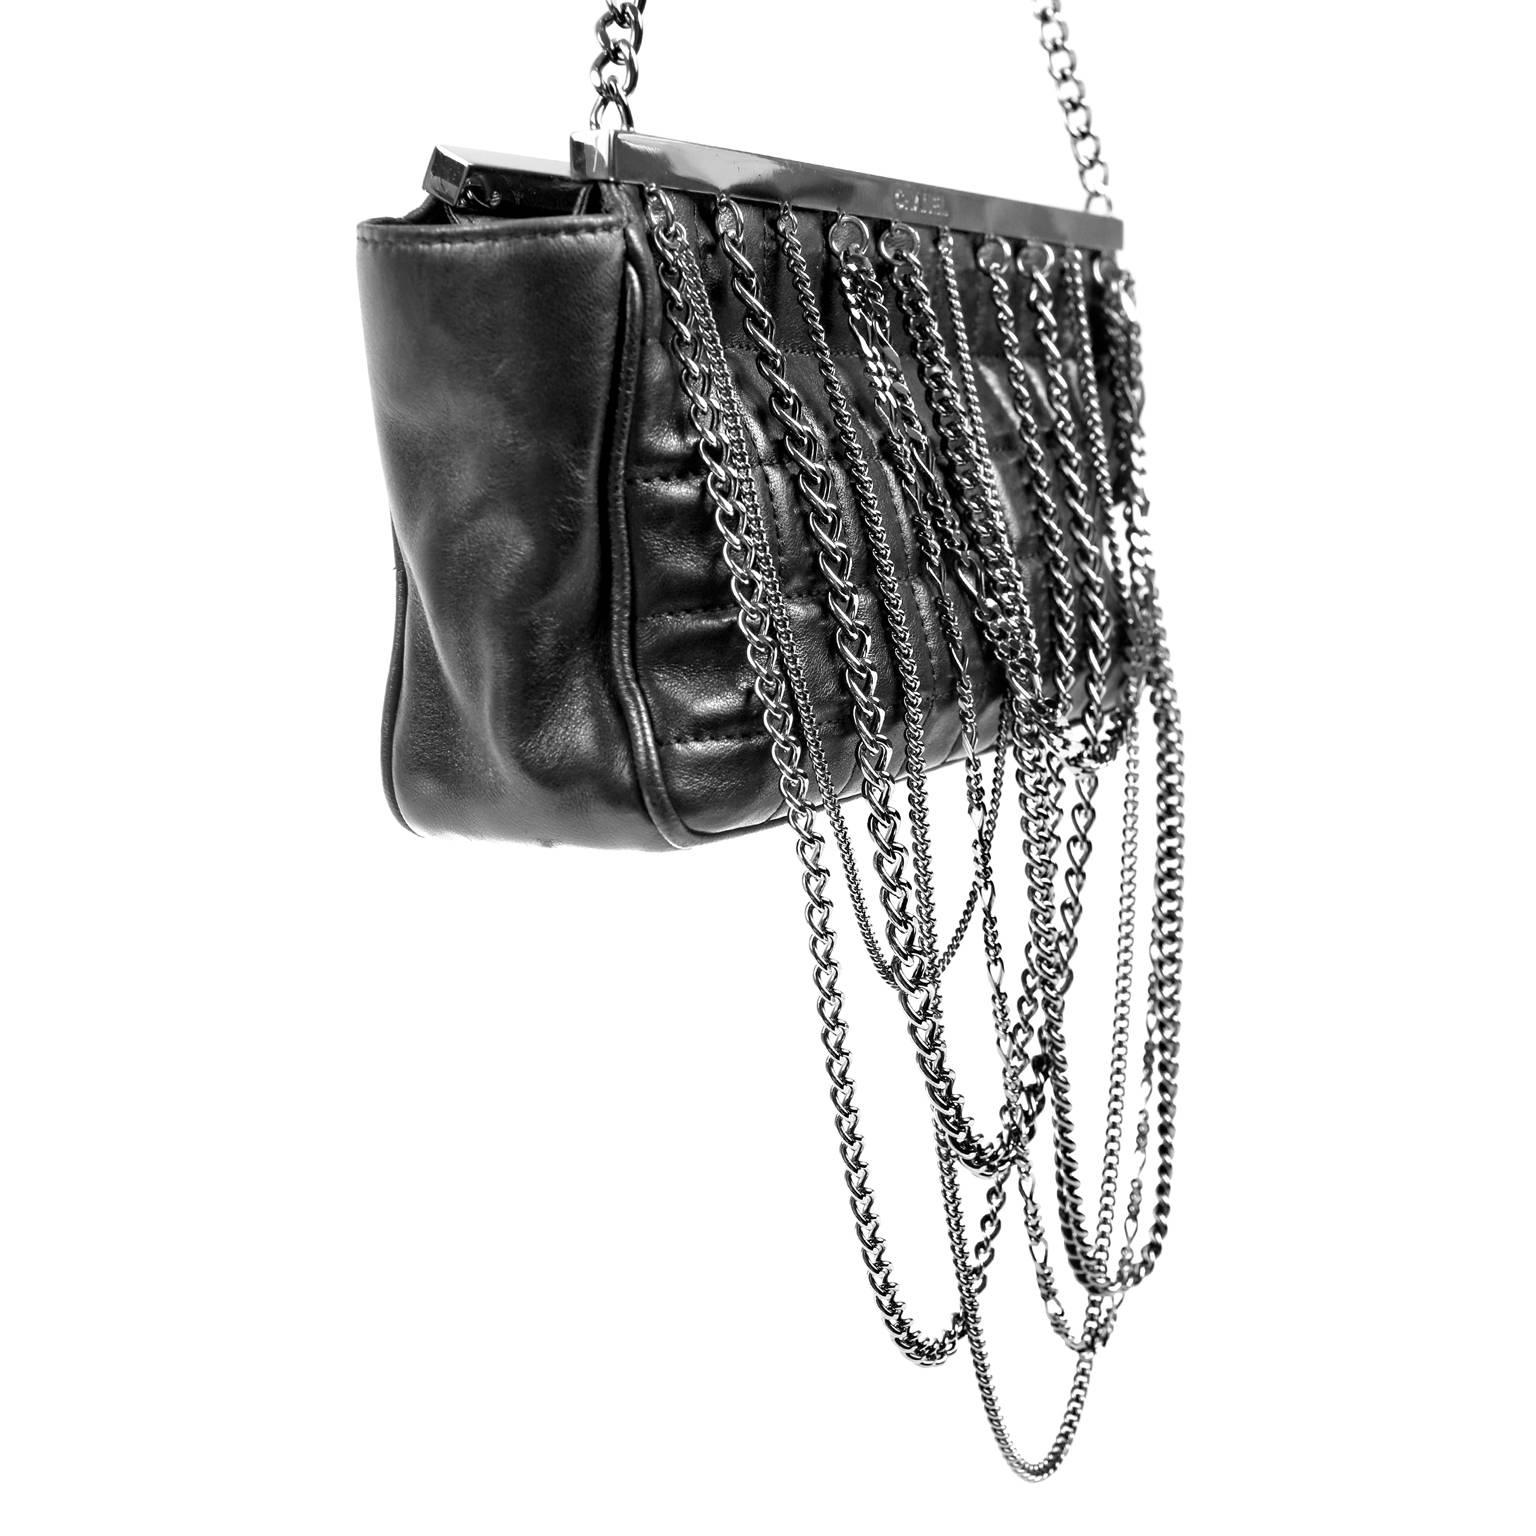 Chanel Black Lambskin Dripping Chains Evening Bag In Excellent Condition For Sale In Malibu, CA